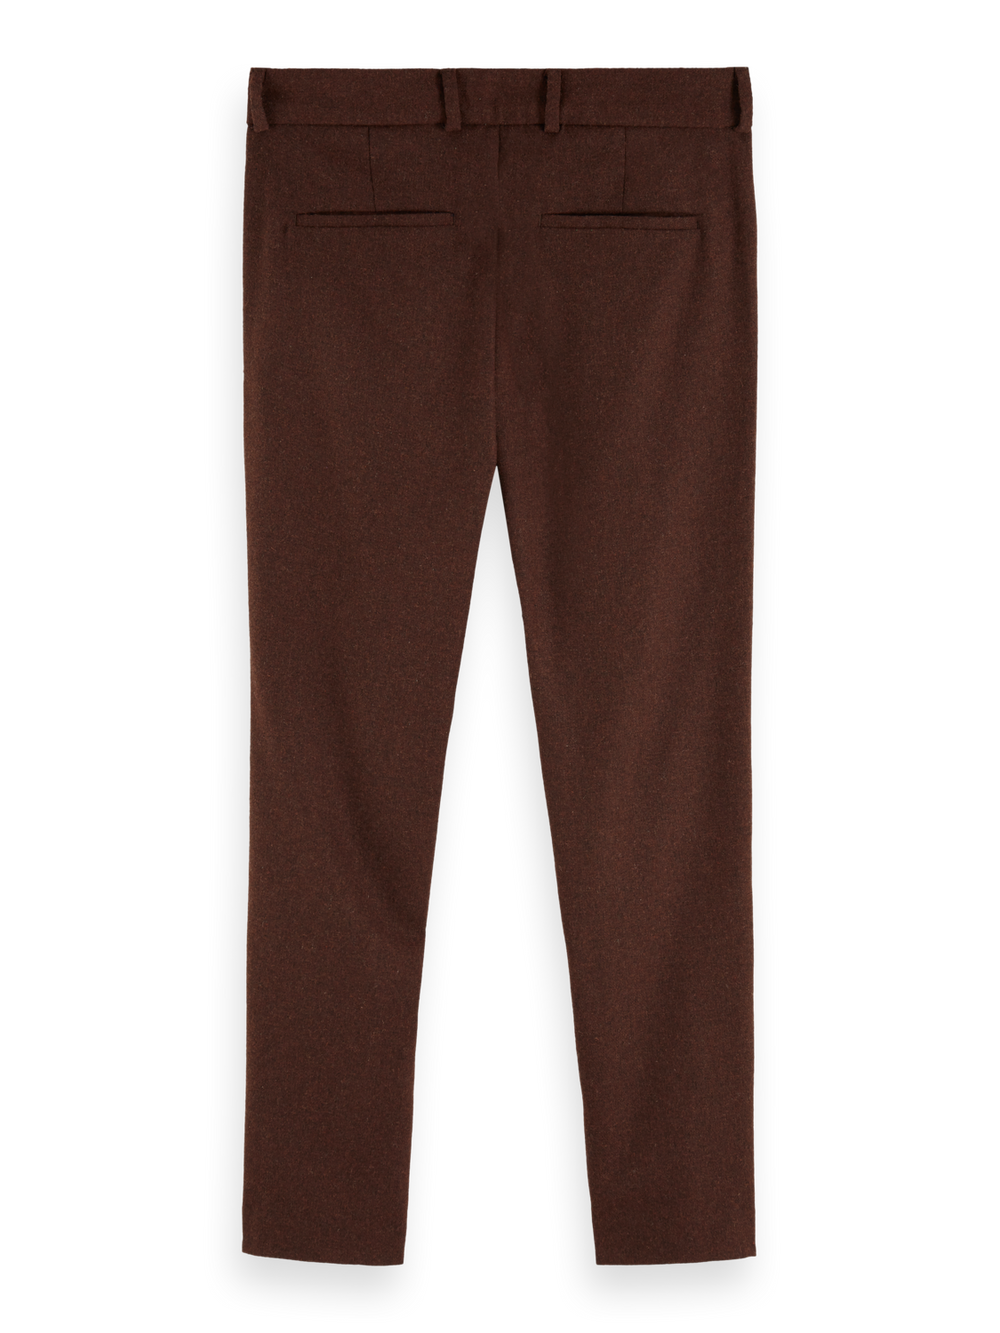 Scotch & Soda - Stuart Stretch Wool-Blend Chino in Brown Melange | Buster McGee